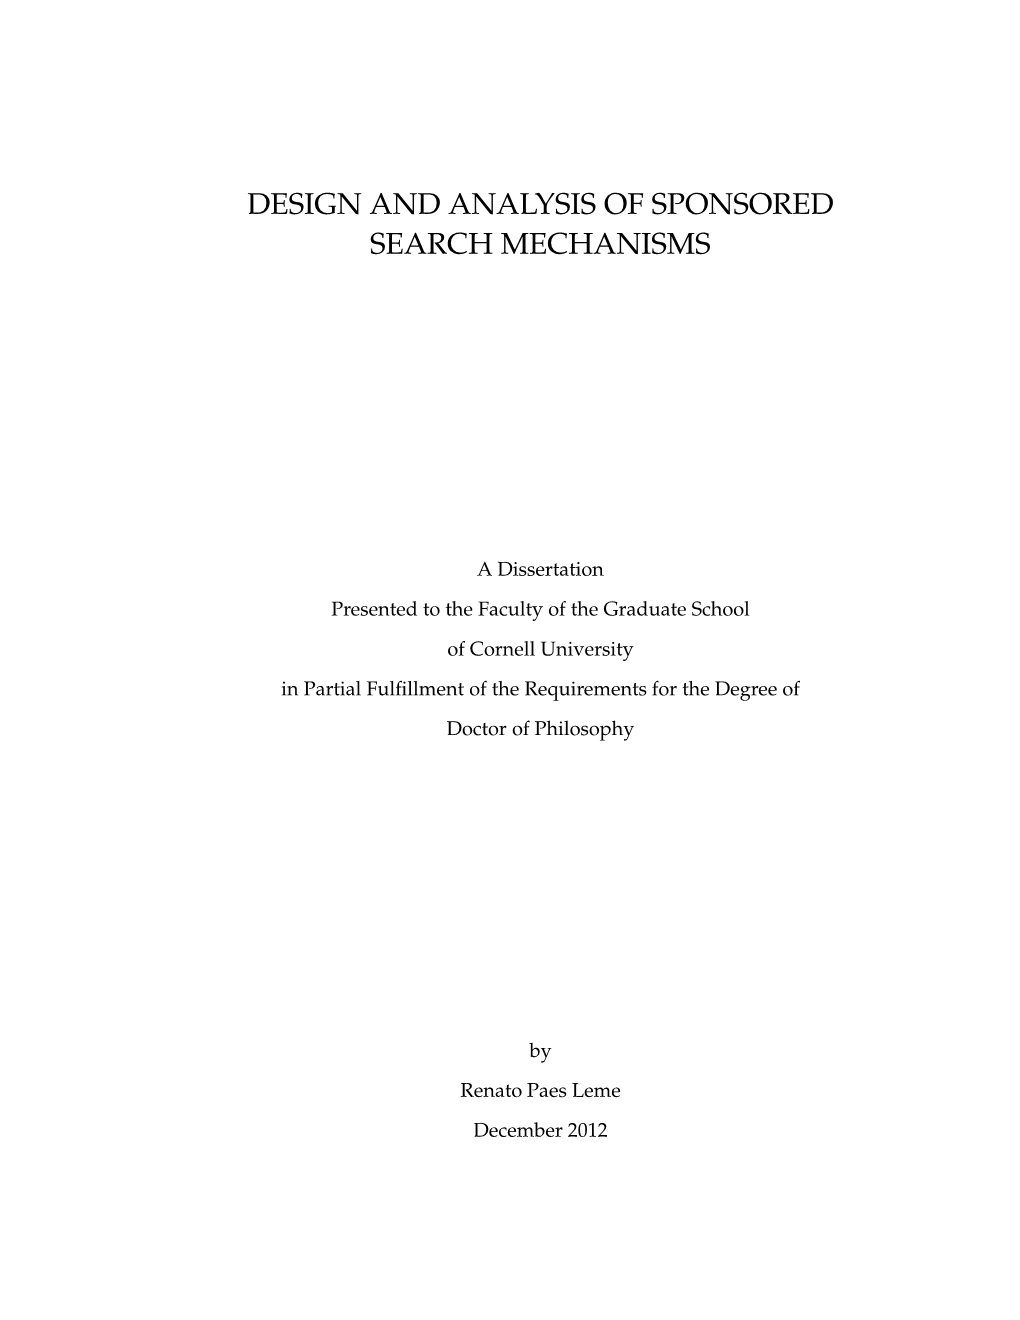 Design and Analysis of Sponsored Search Mechanisms